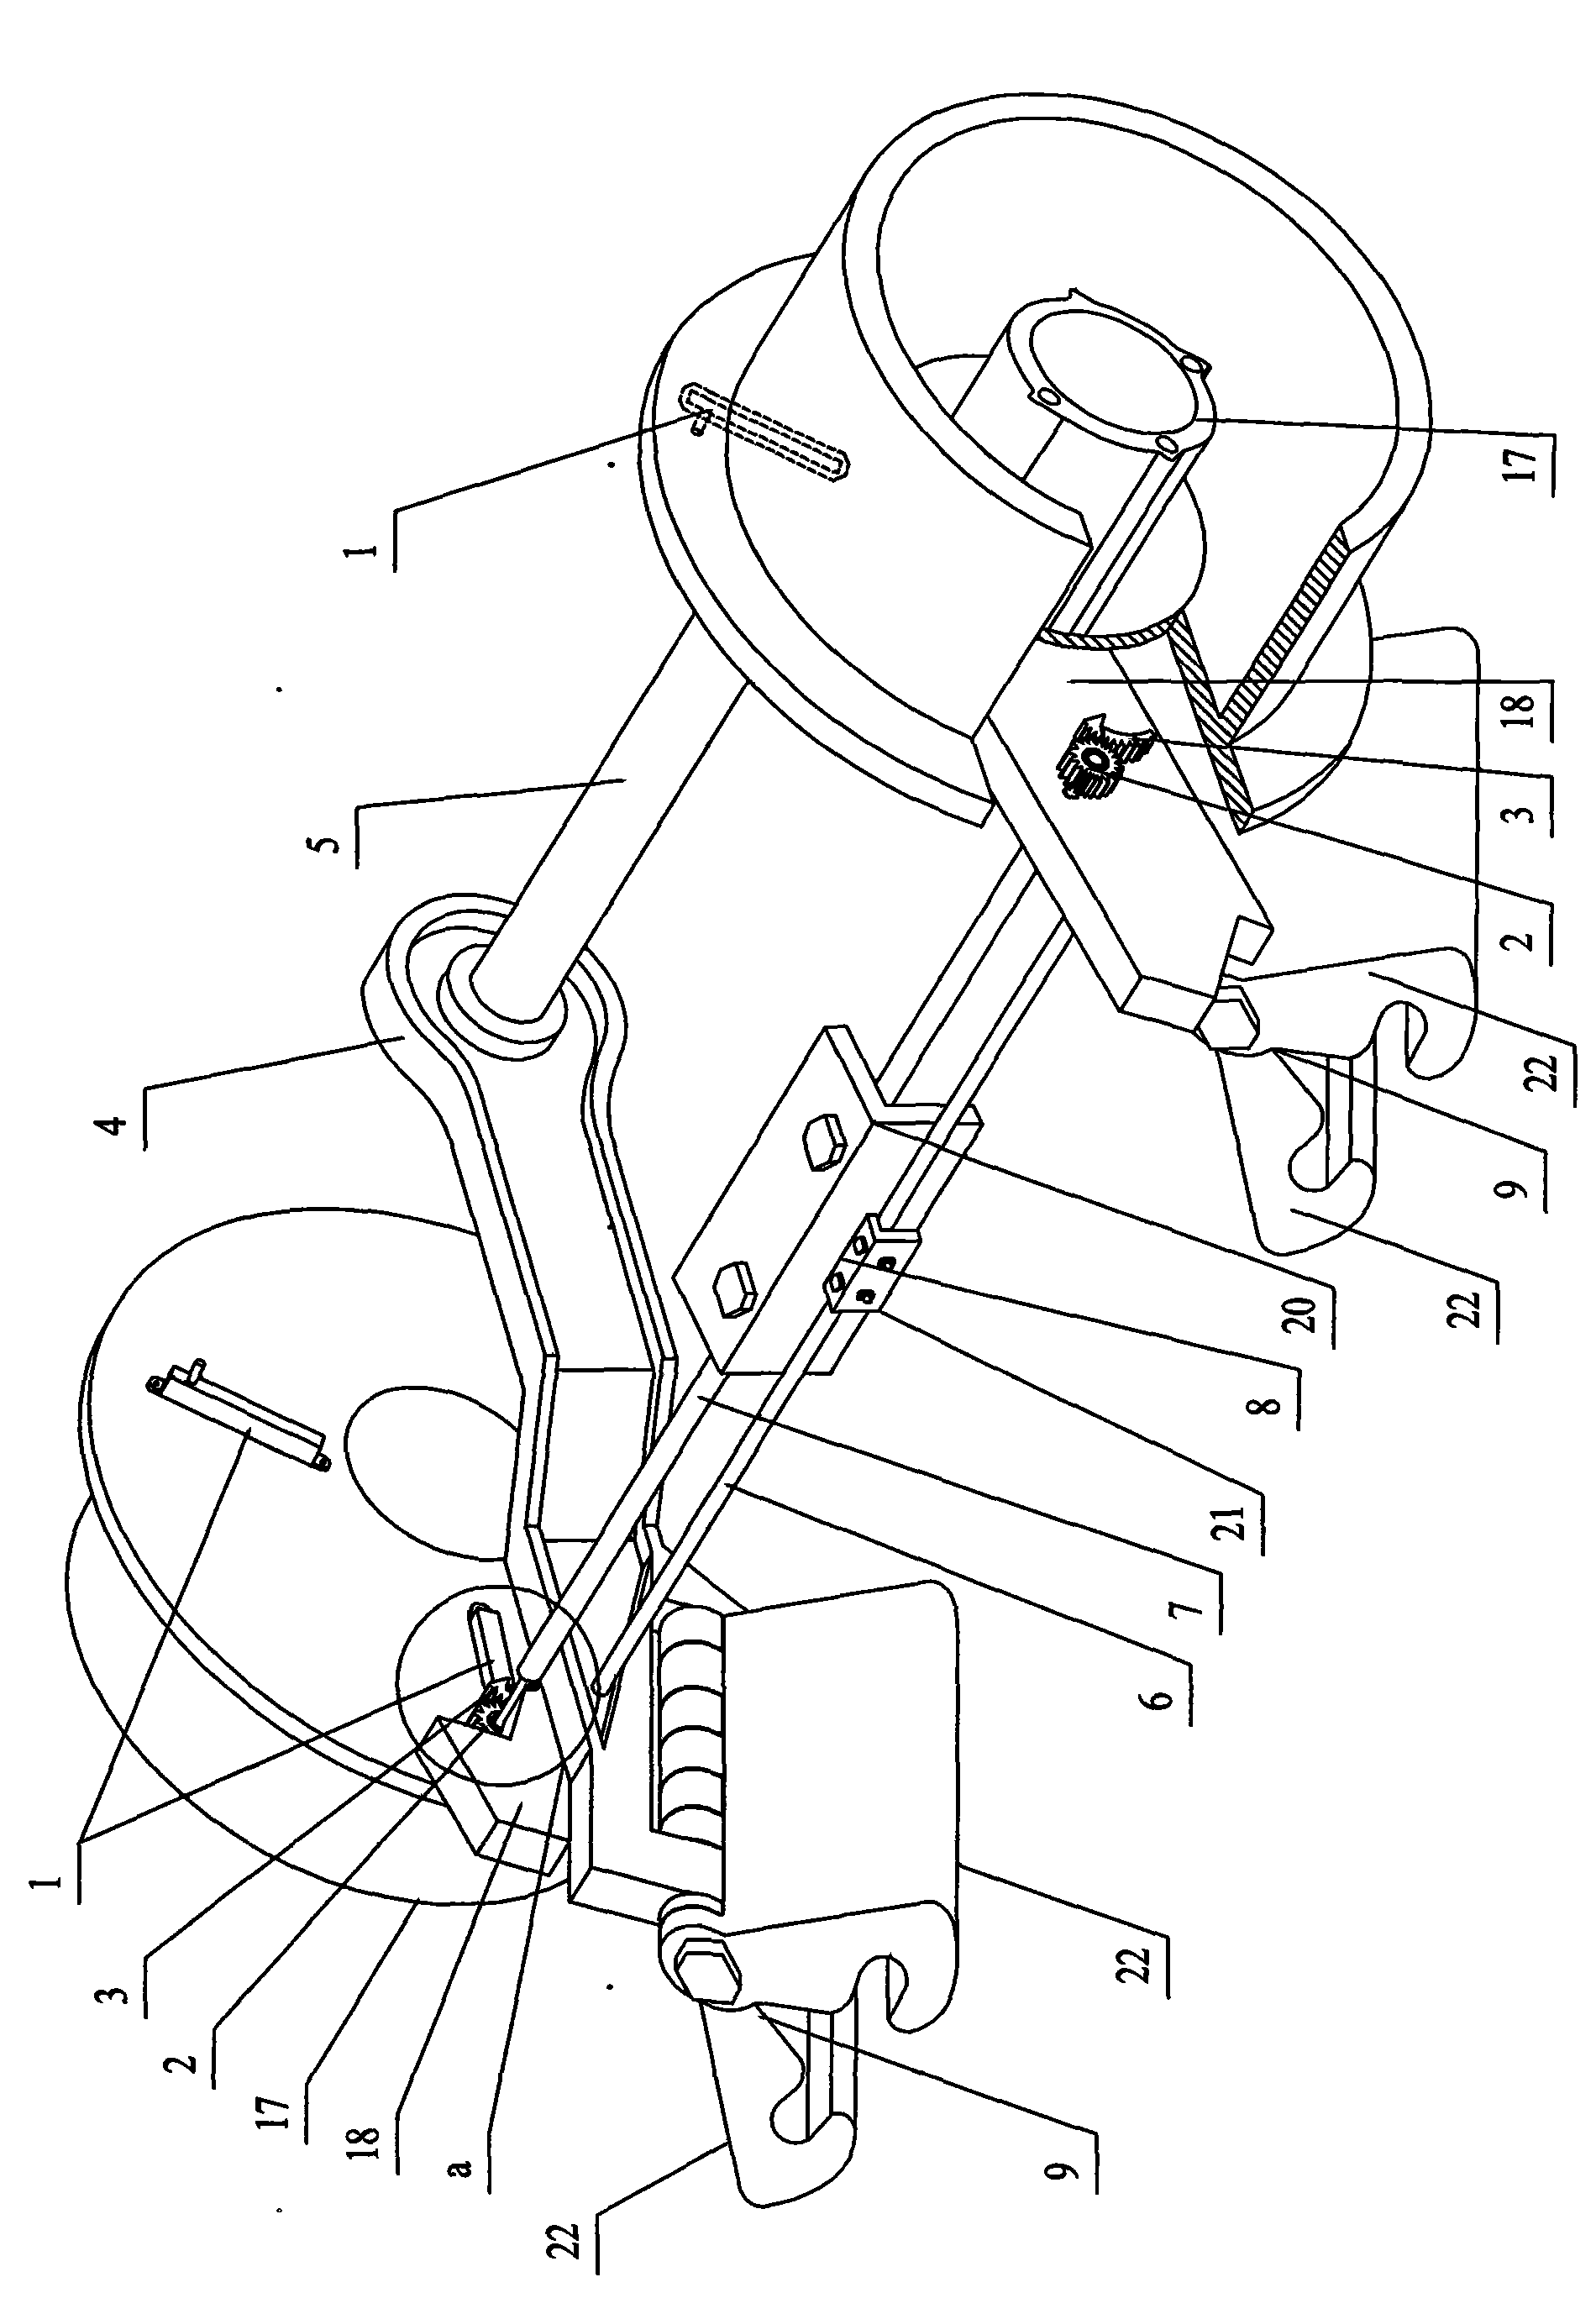 Centrifugal force safety braking device of active track-locking type tramcar